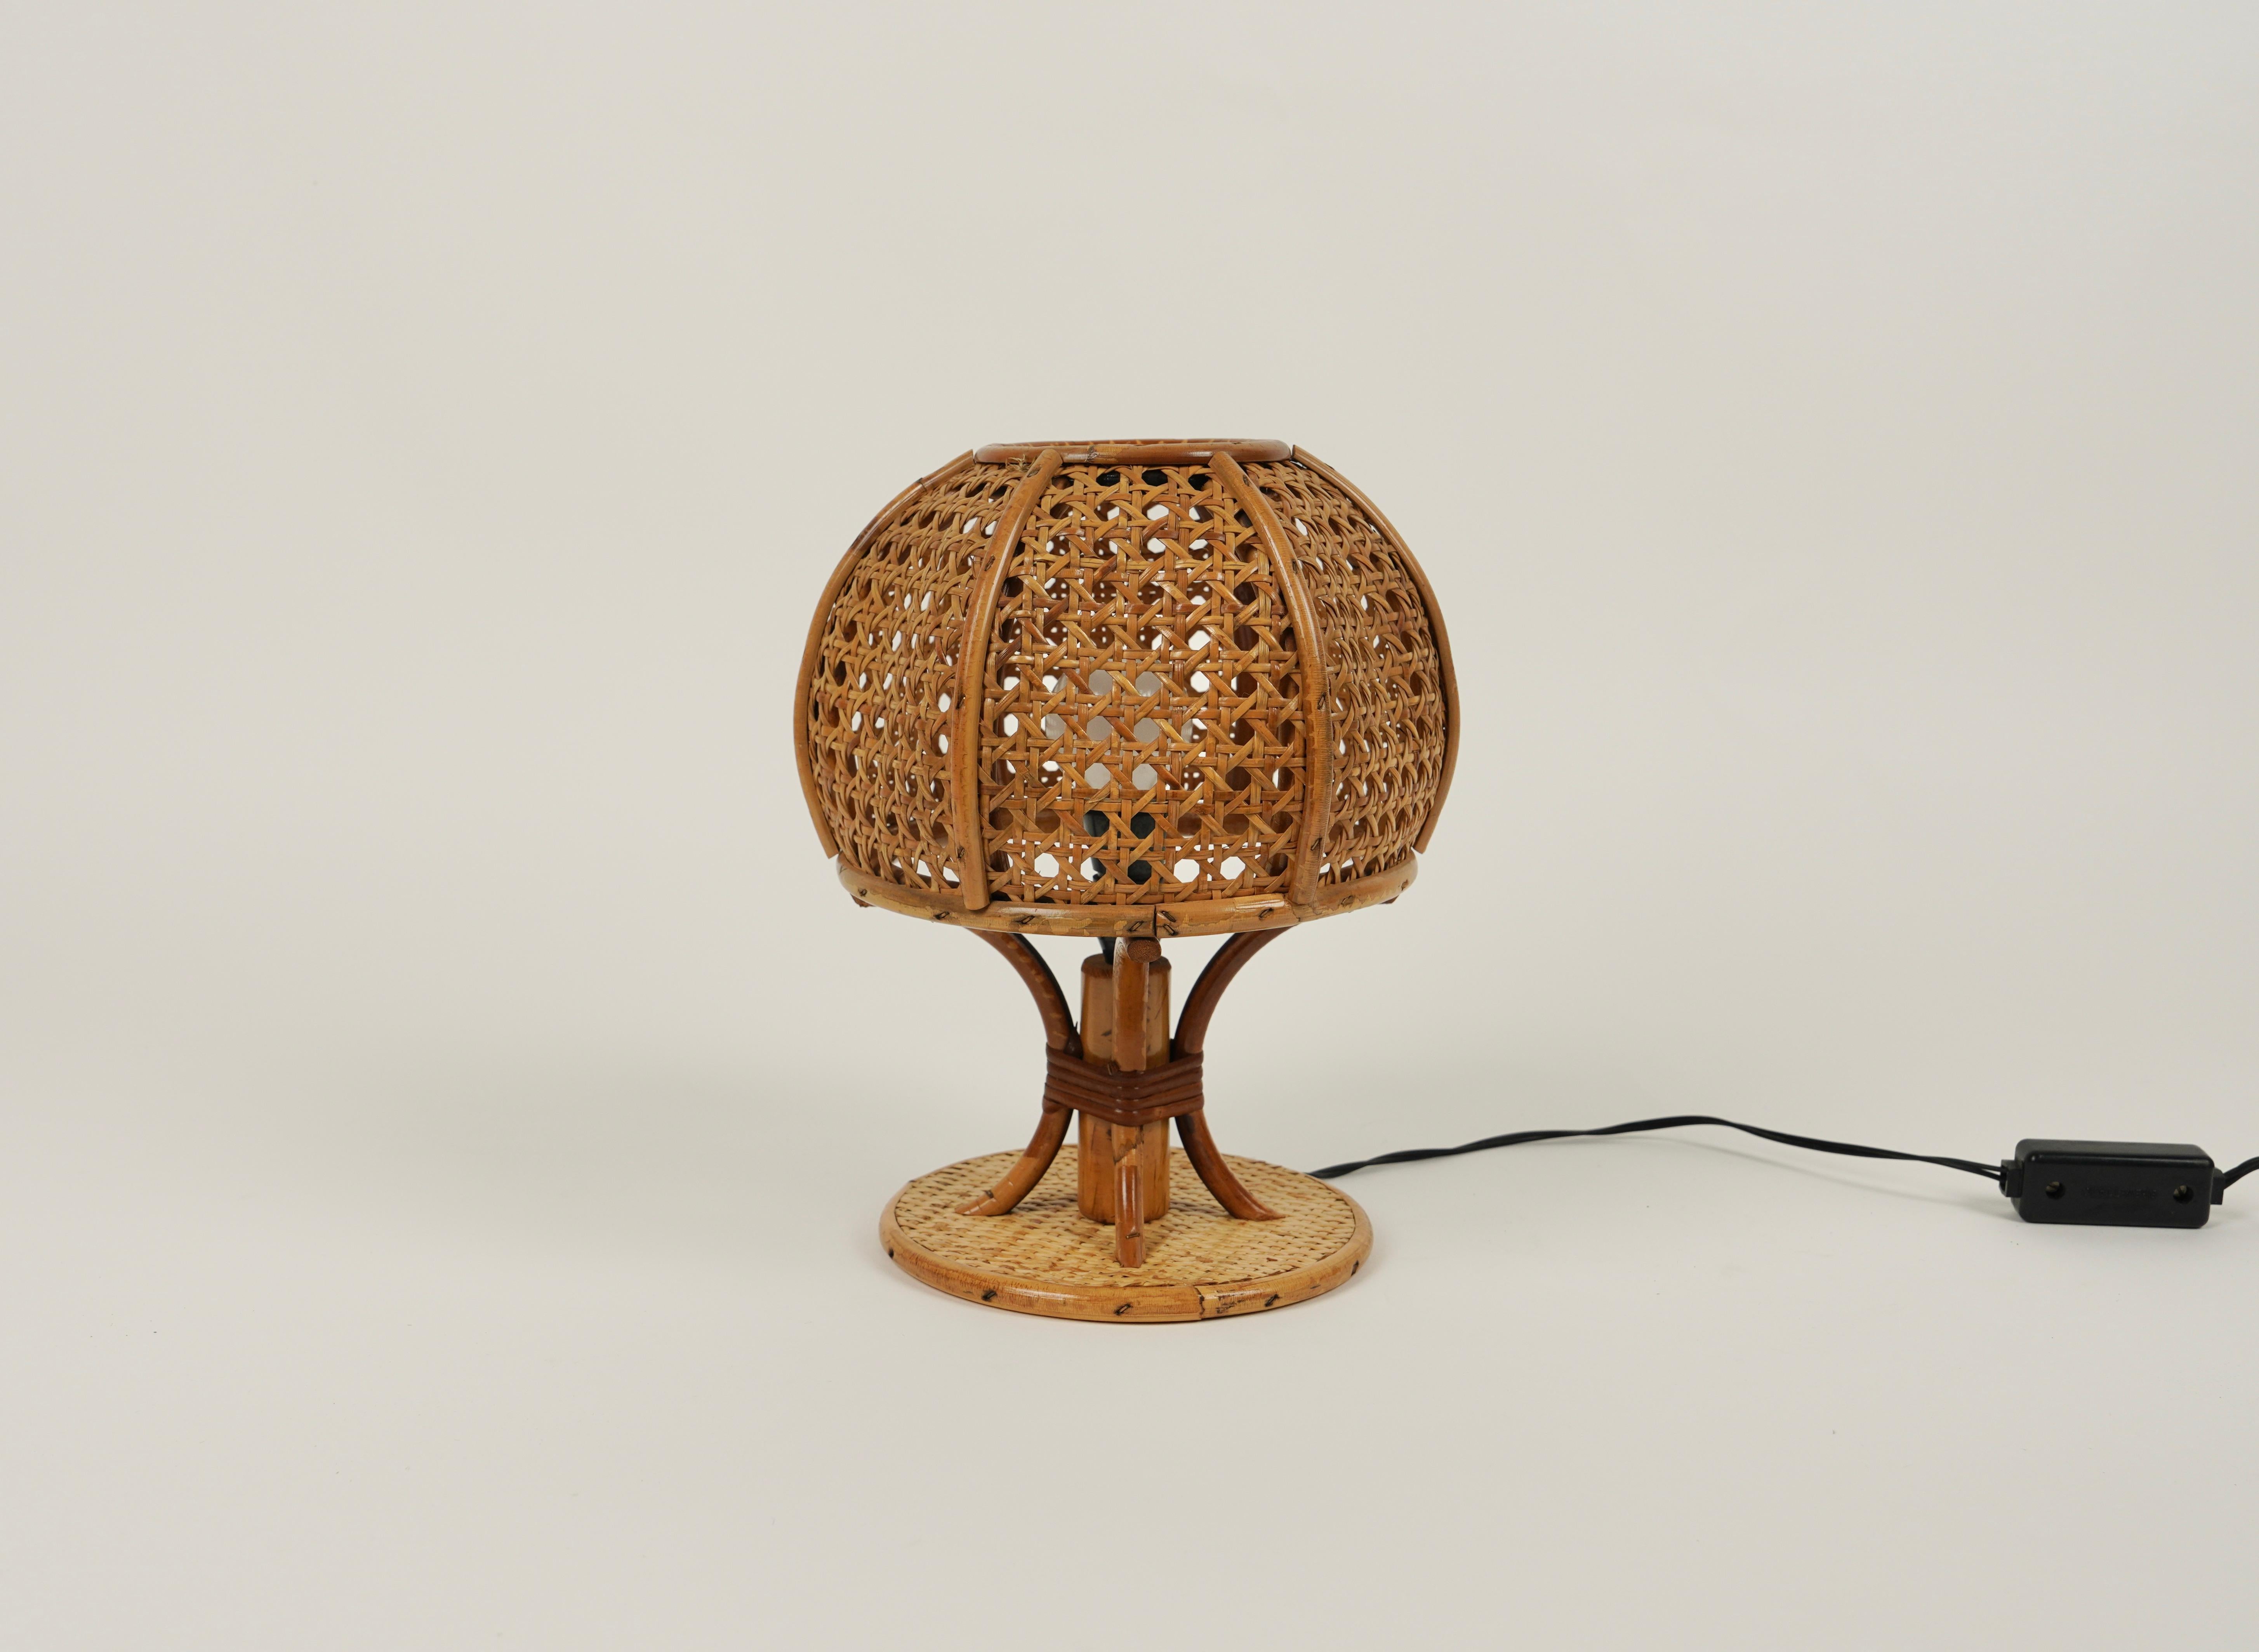 Beautiful table lamp in rattan and wicker in the style of Louis Sognot. 

Made in Italy in the 1970s. 

Louis Sognot was a French designer best known for his elegant furniture made from a combination of rattan and wood. Sognot was influenced by